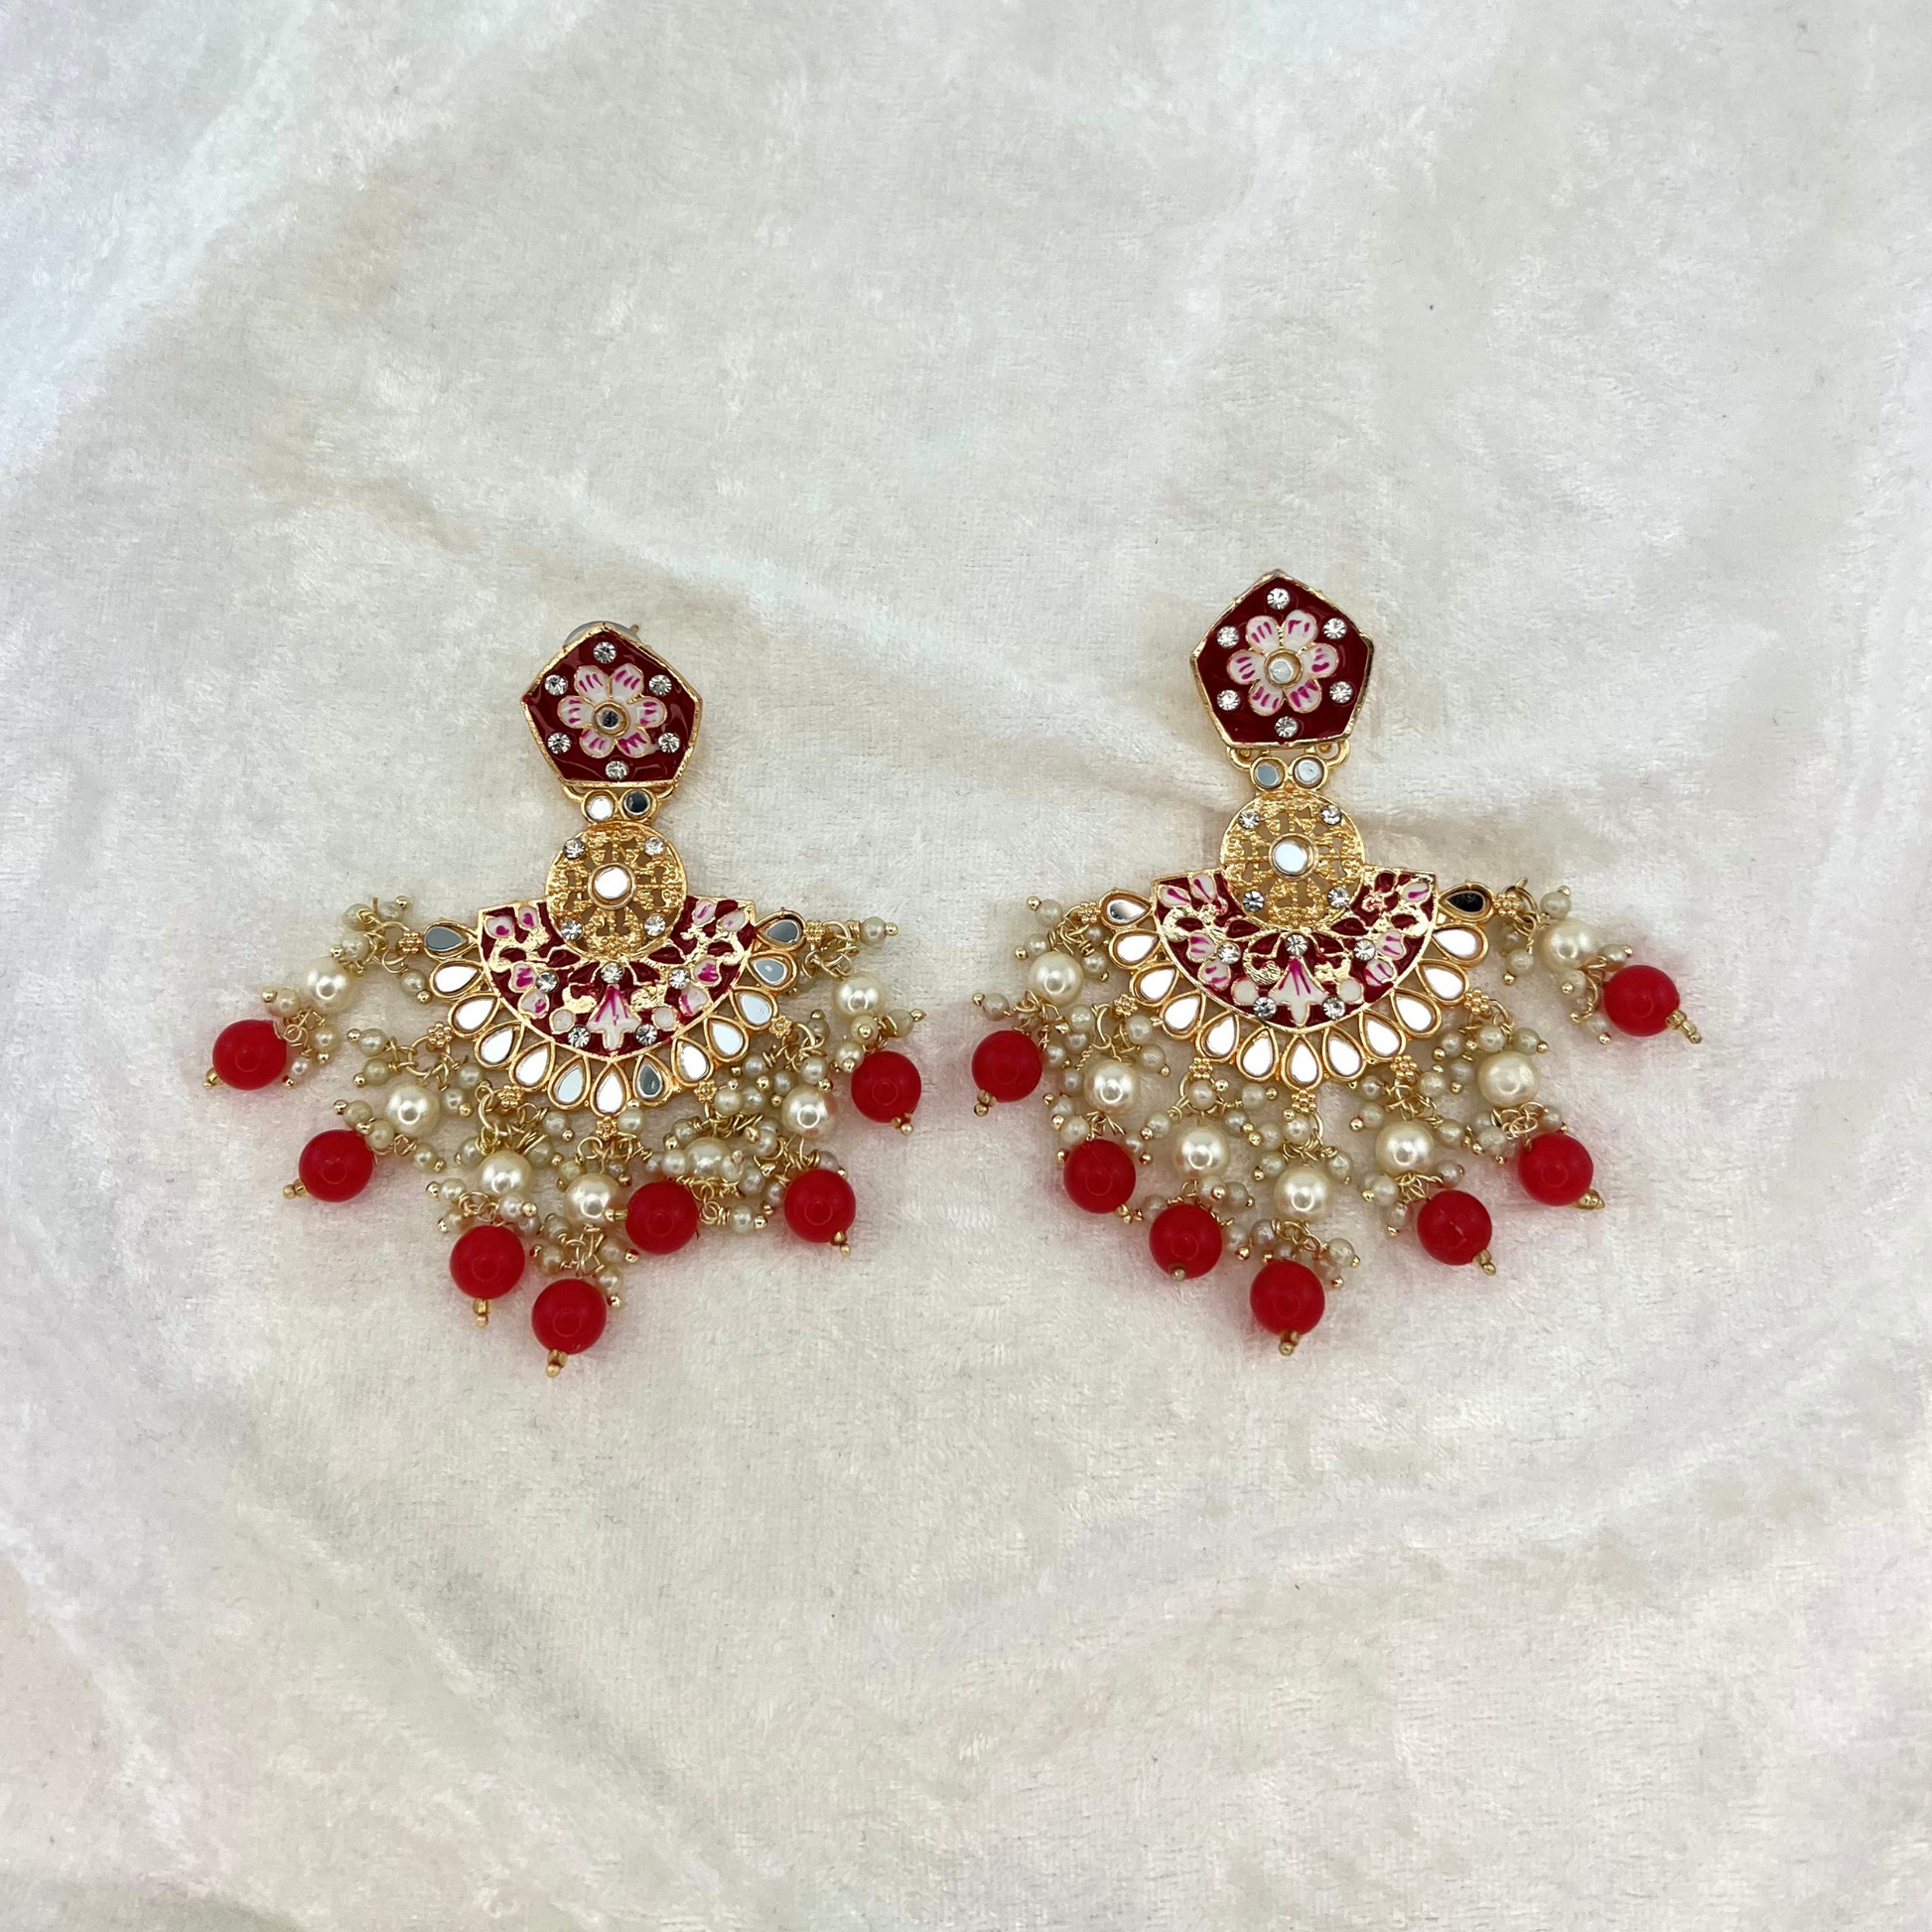 High quality hand painted earrings in Red with pearls, beads, mirrors and stone work. Latest 2022 indian jewellery for weddings, parties and special occasions.